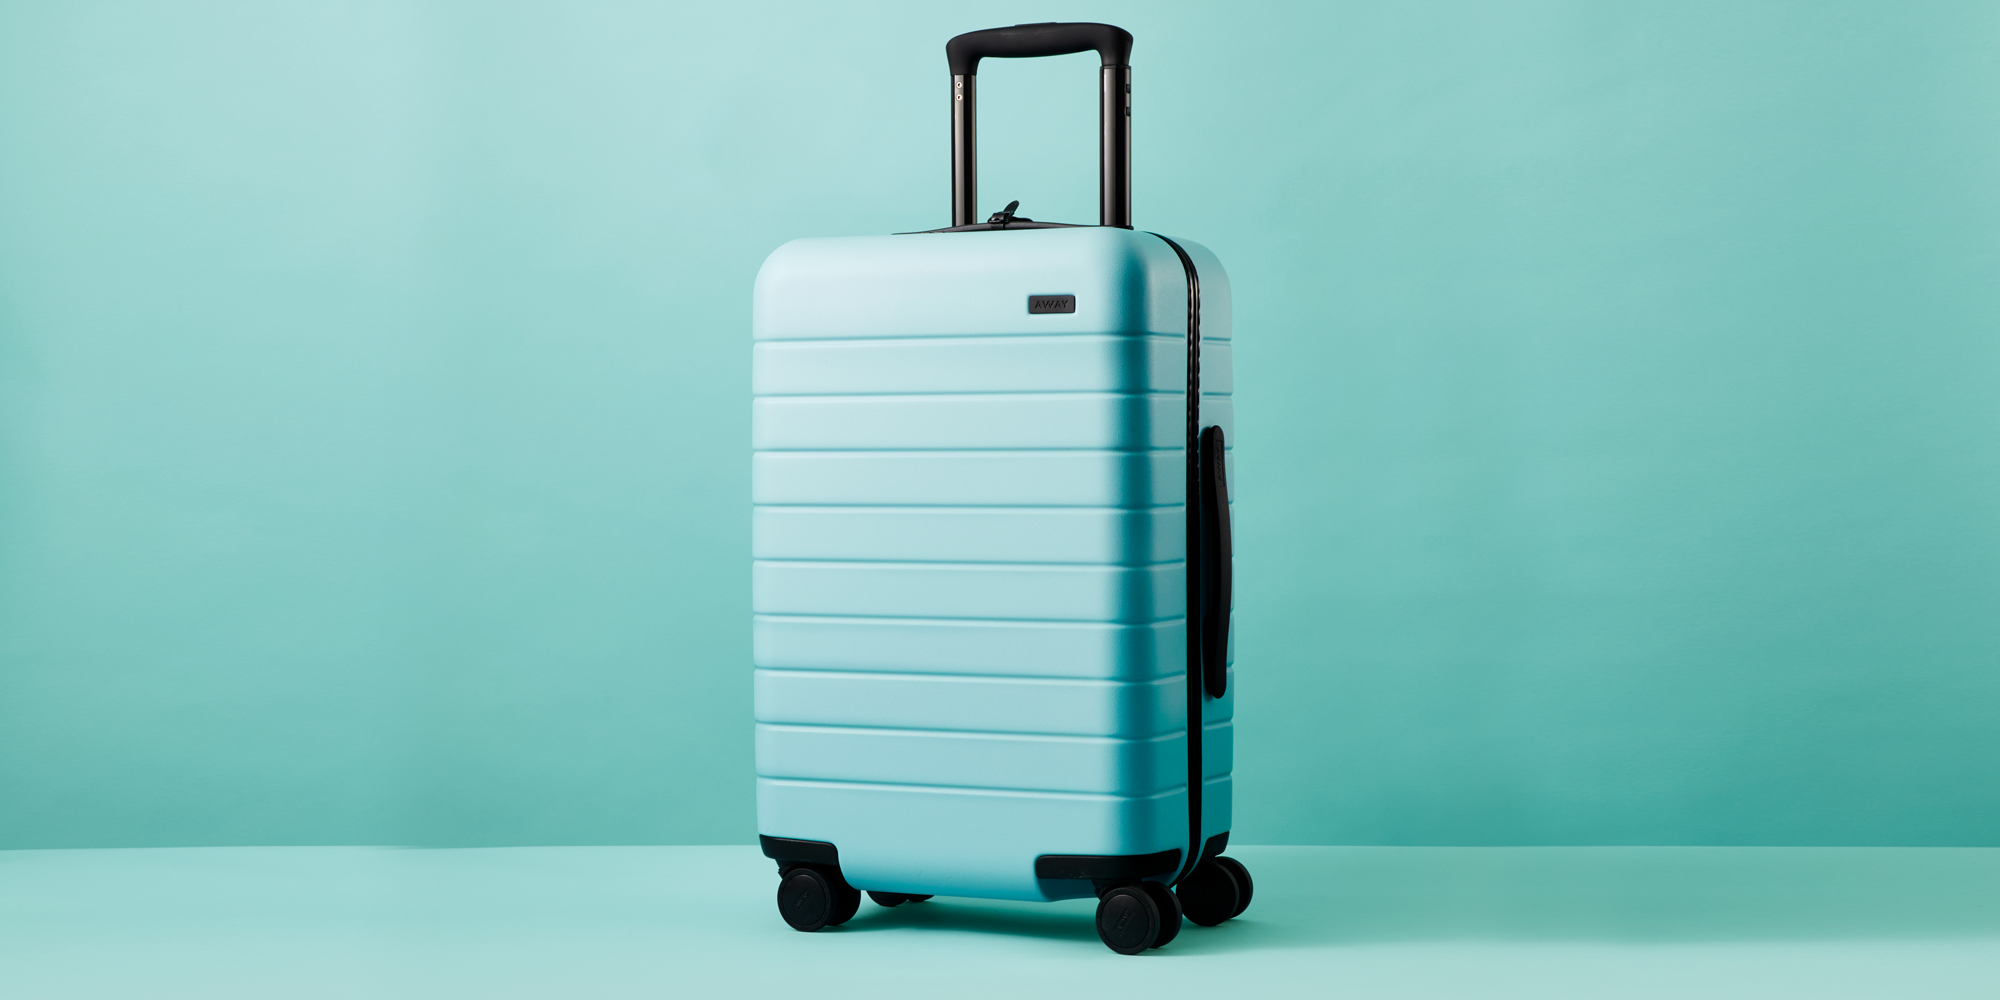 14 Best Luggage Brands 2020 - Top 